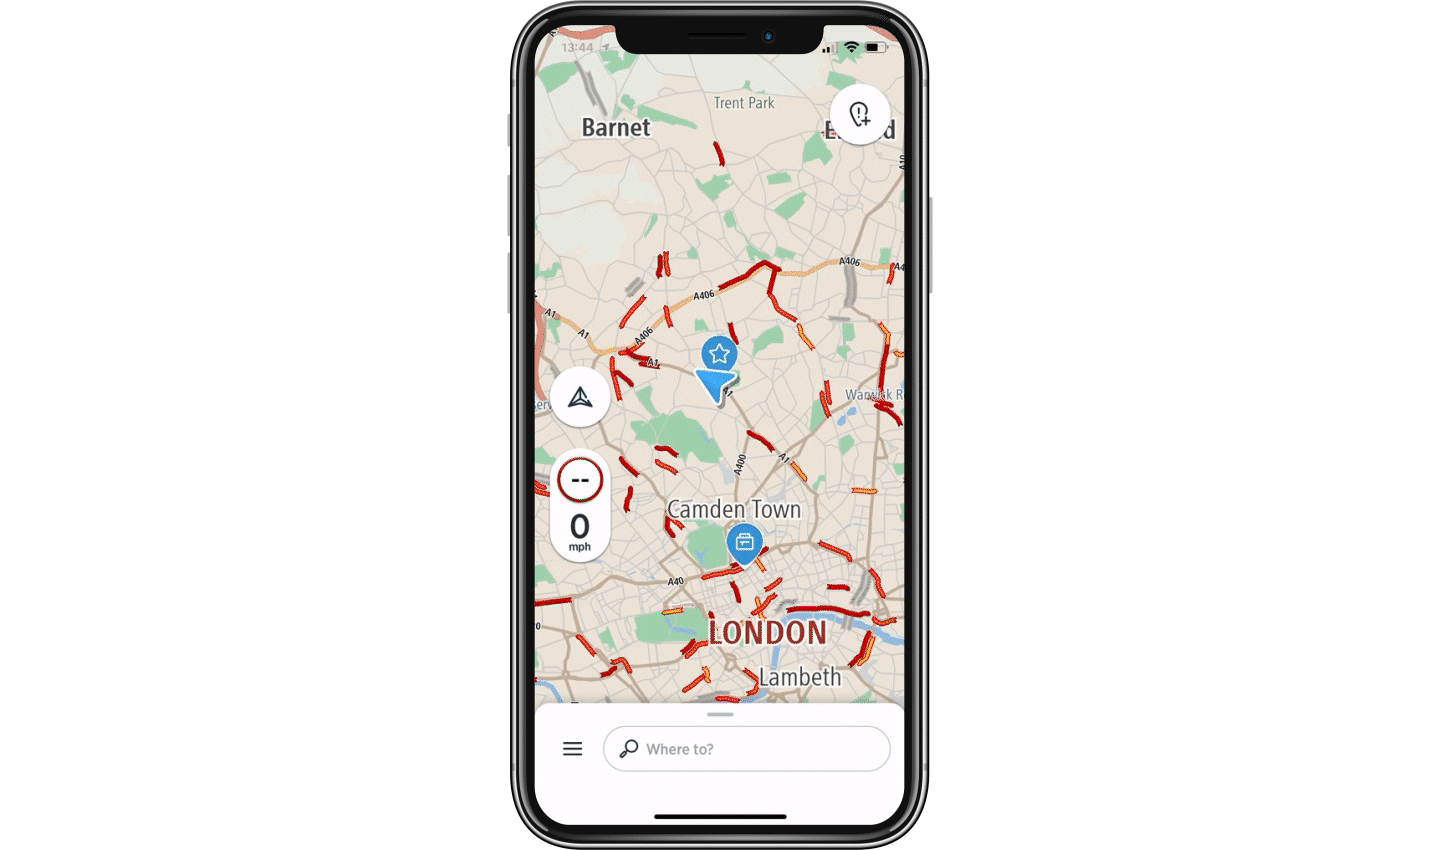 Pick your desired route, use the 'Options' button to select if you want to avoid motorways or tolls, and then click 'Go'.